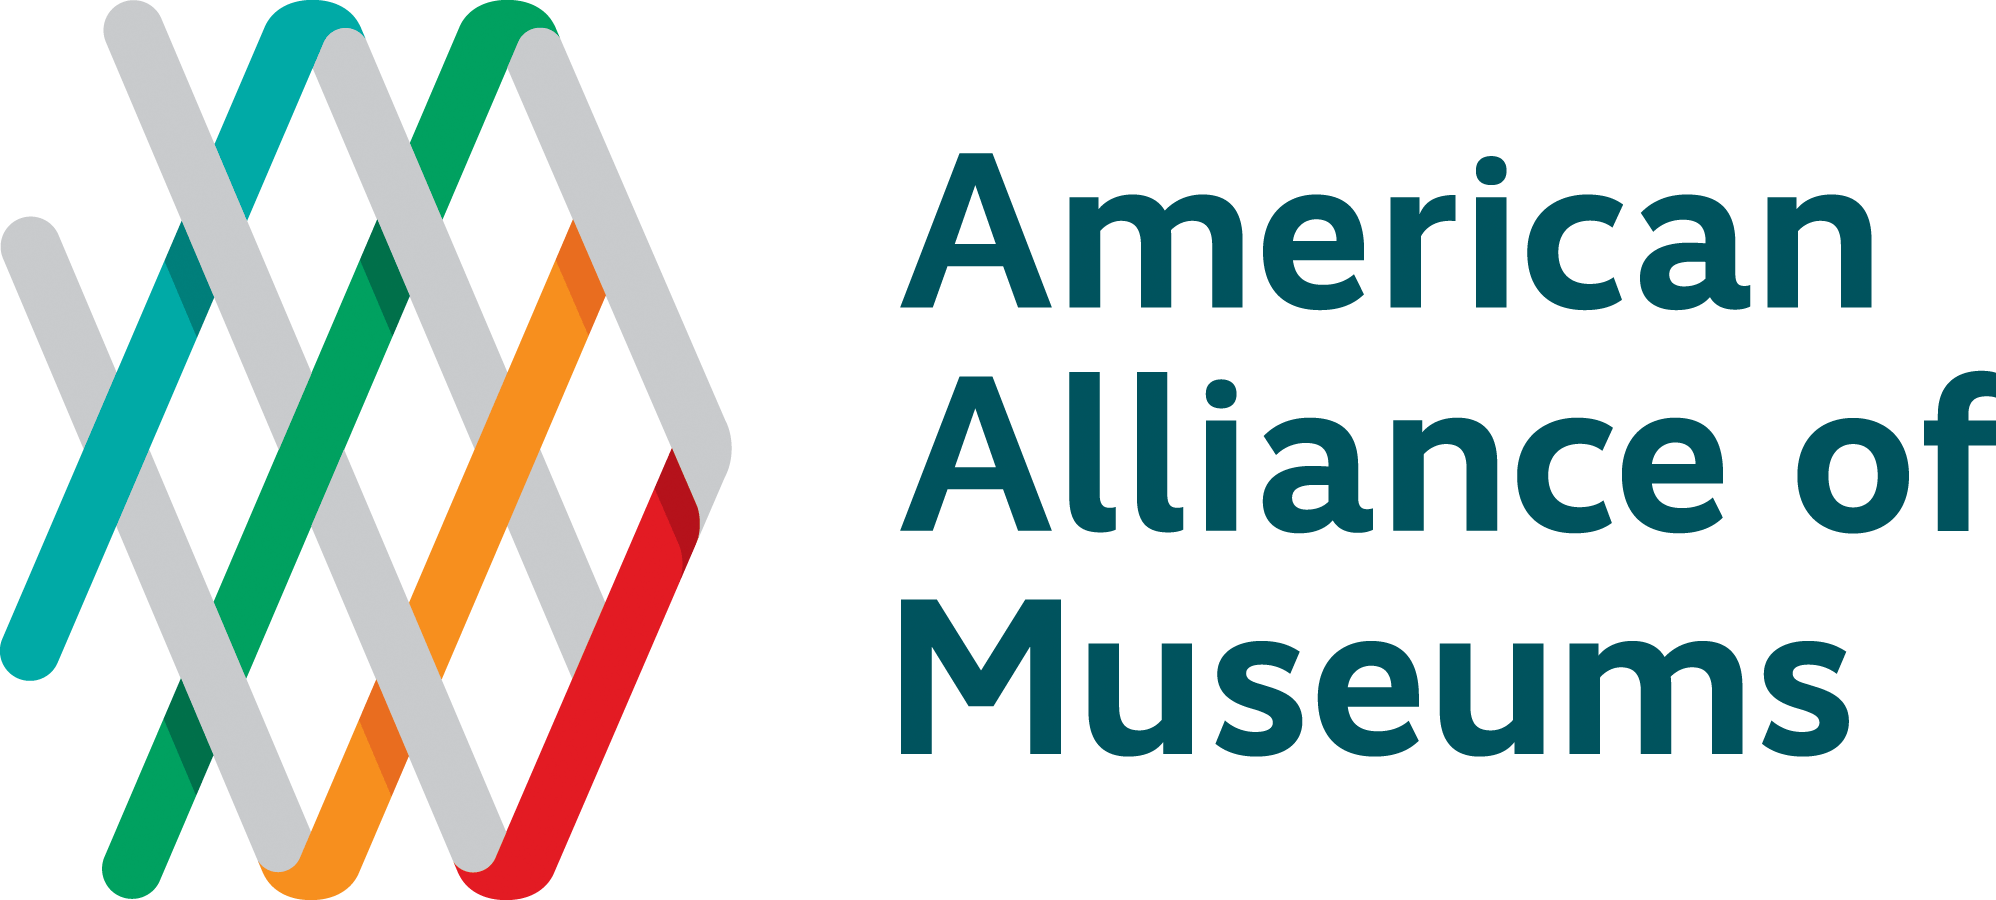 Wings Museum Partner: American Alliance of Museums